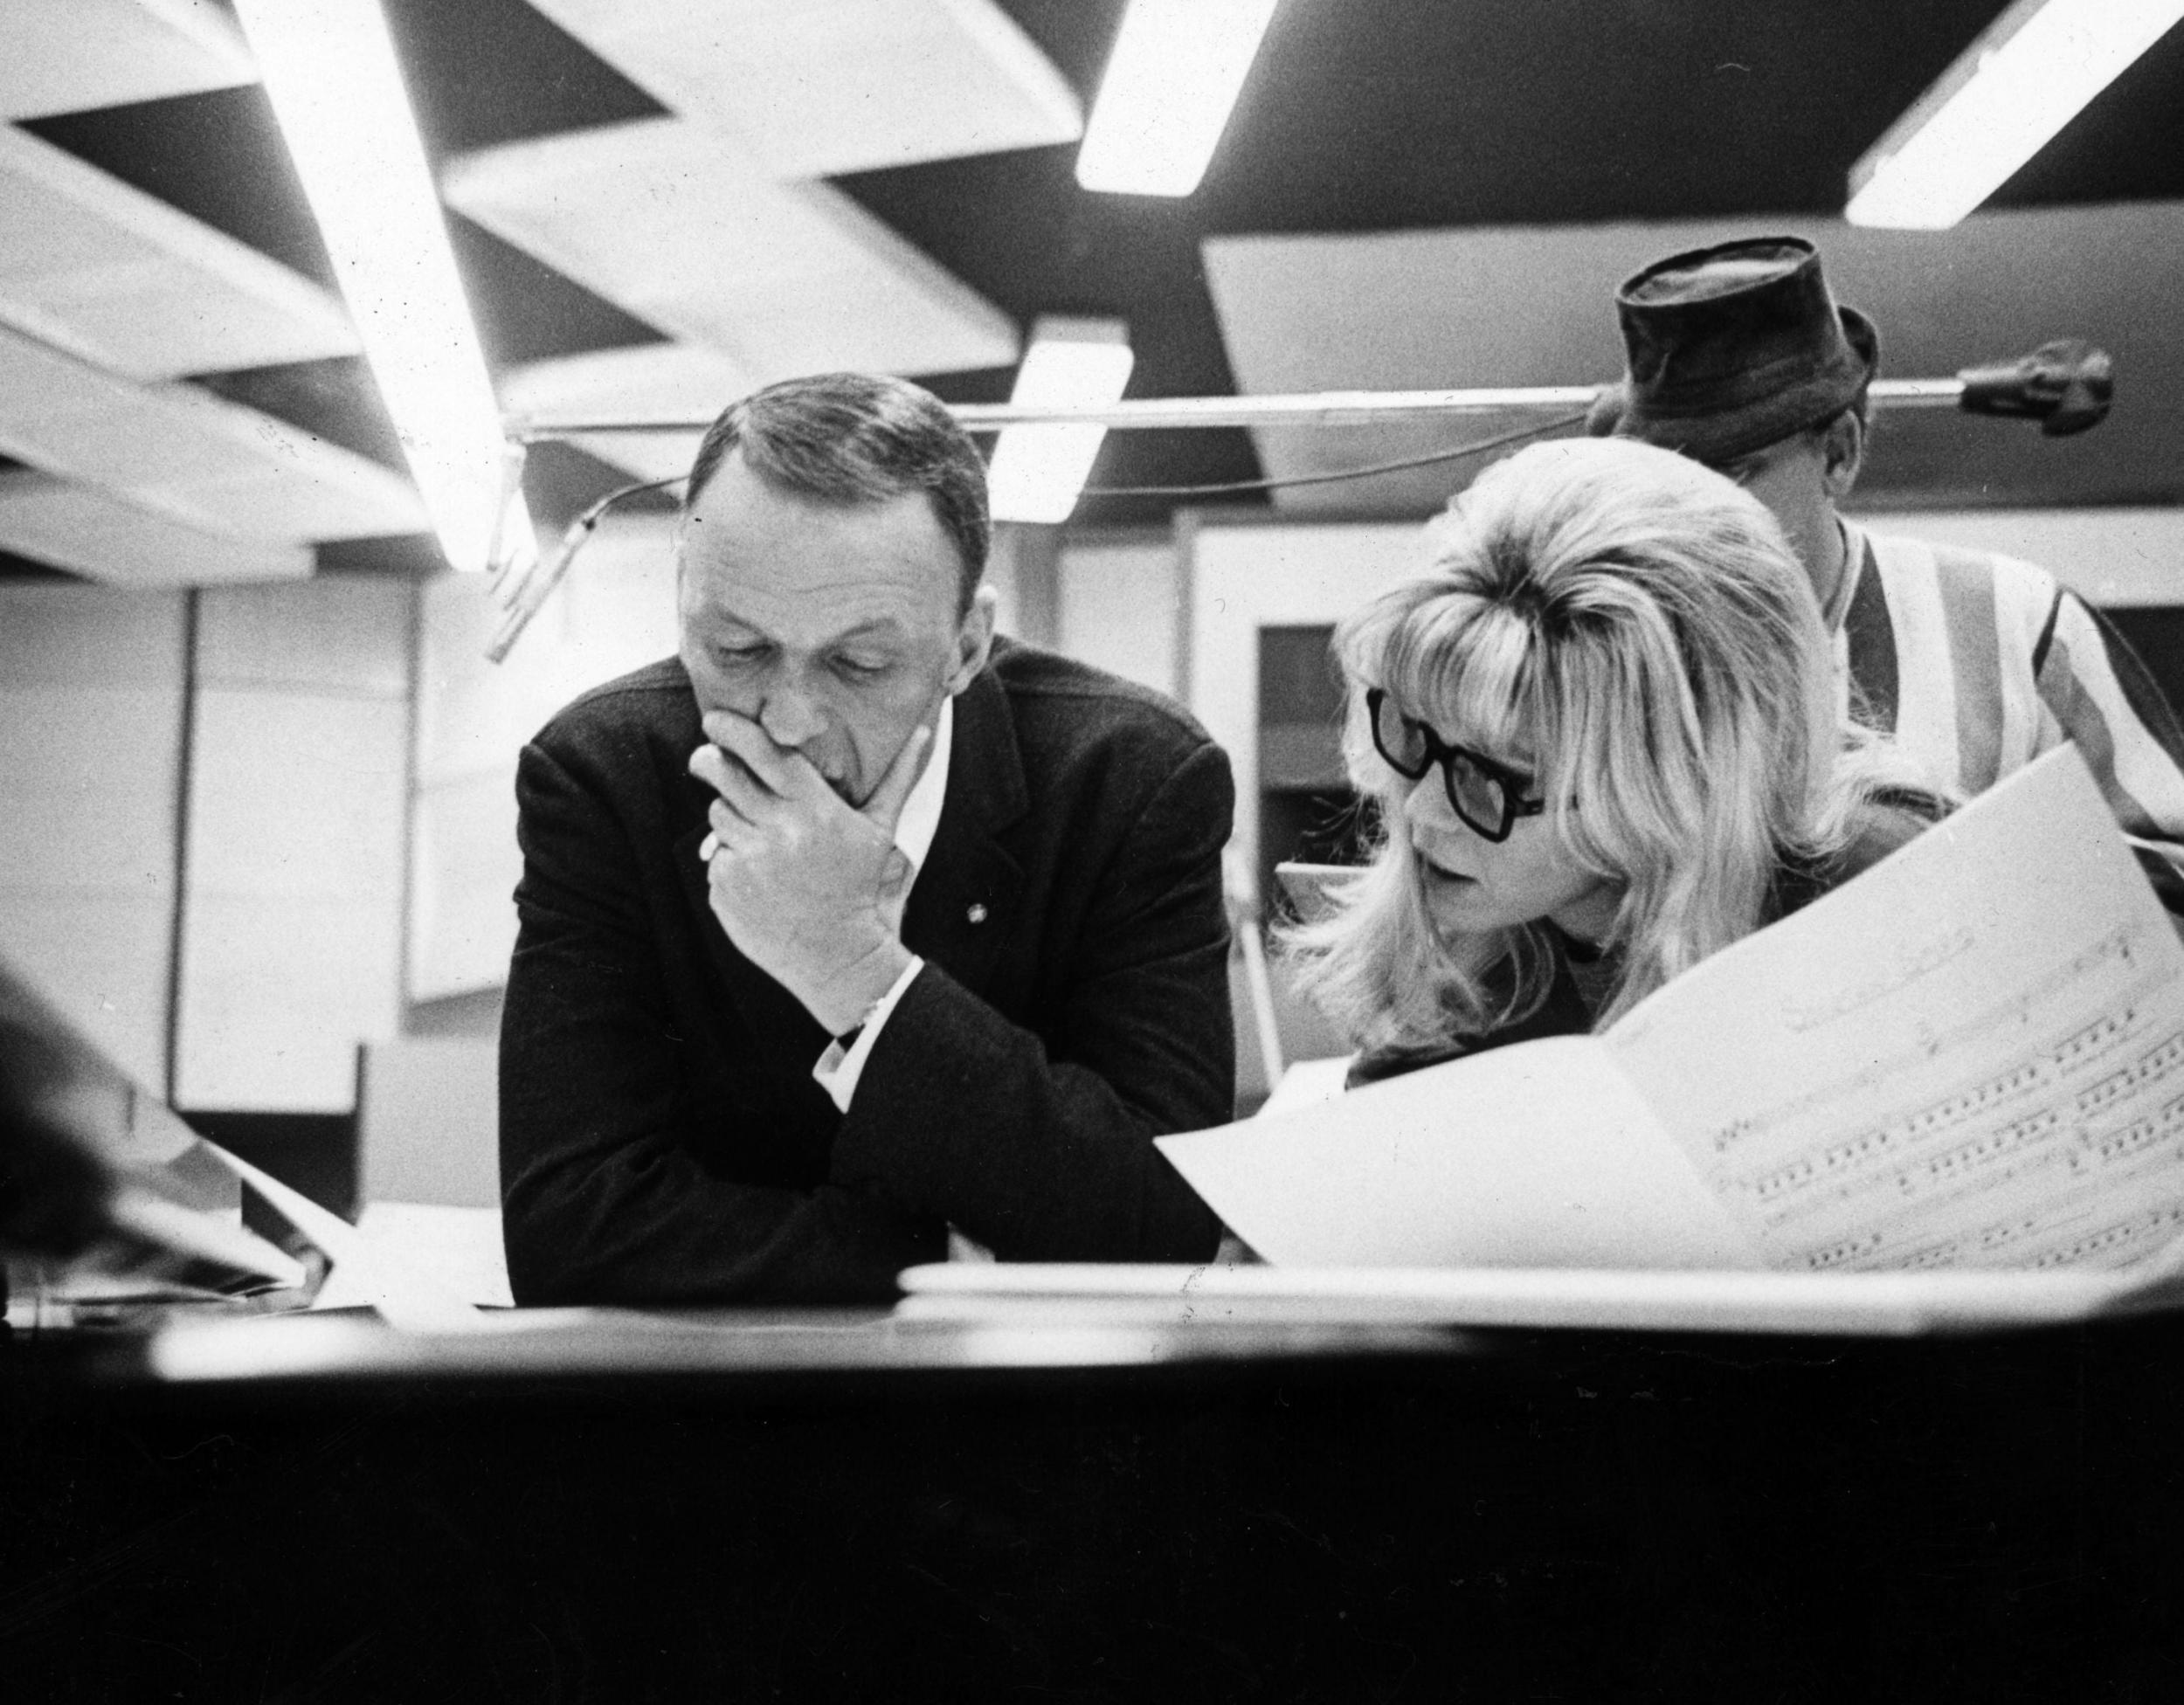 ‘And then I go and spoil it all by saying summit stupid...’: Frank and Nancy Sinatra discuss the lyrics of their 1967 chart-topper